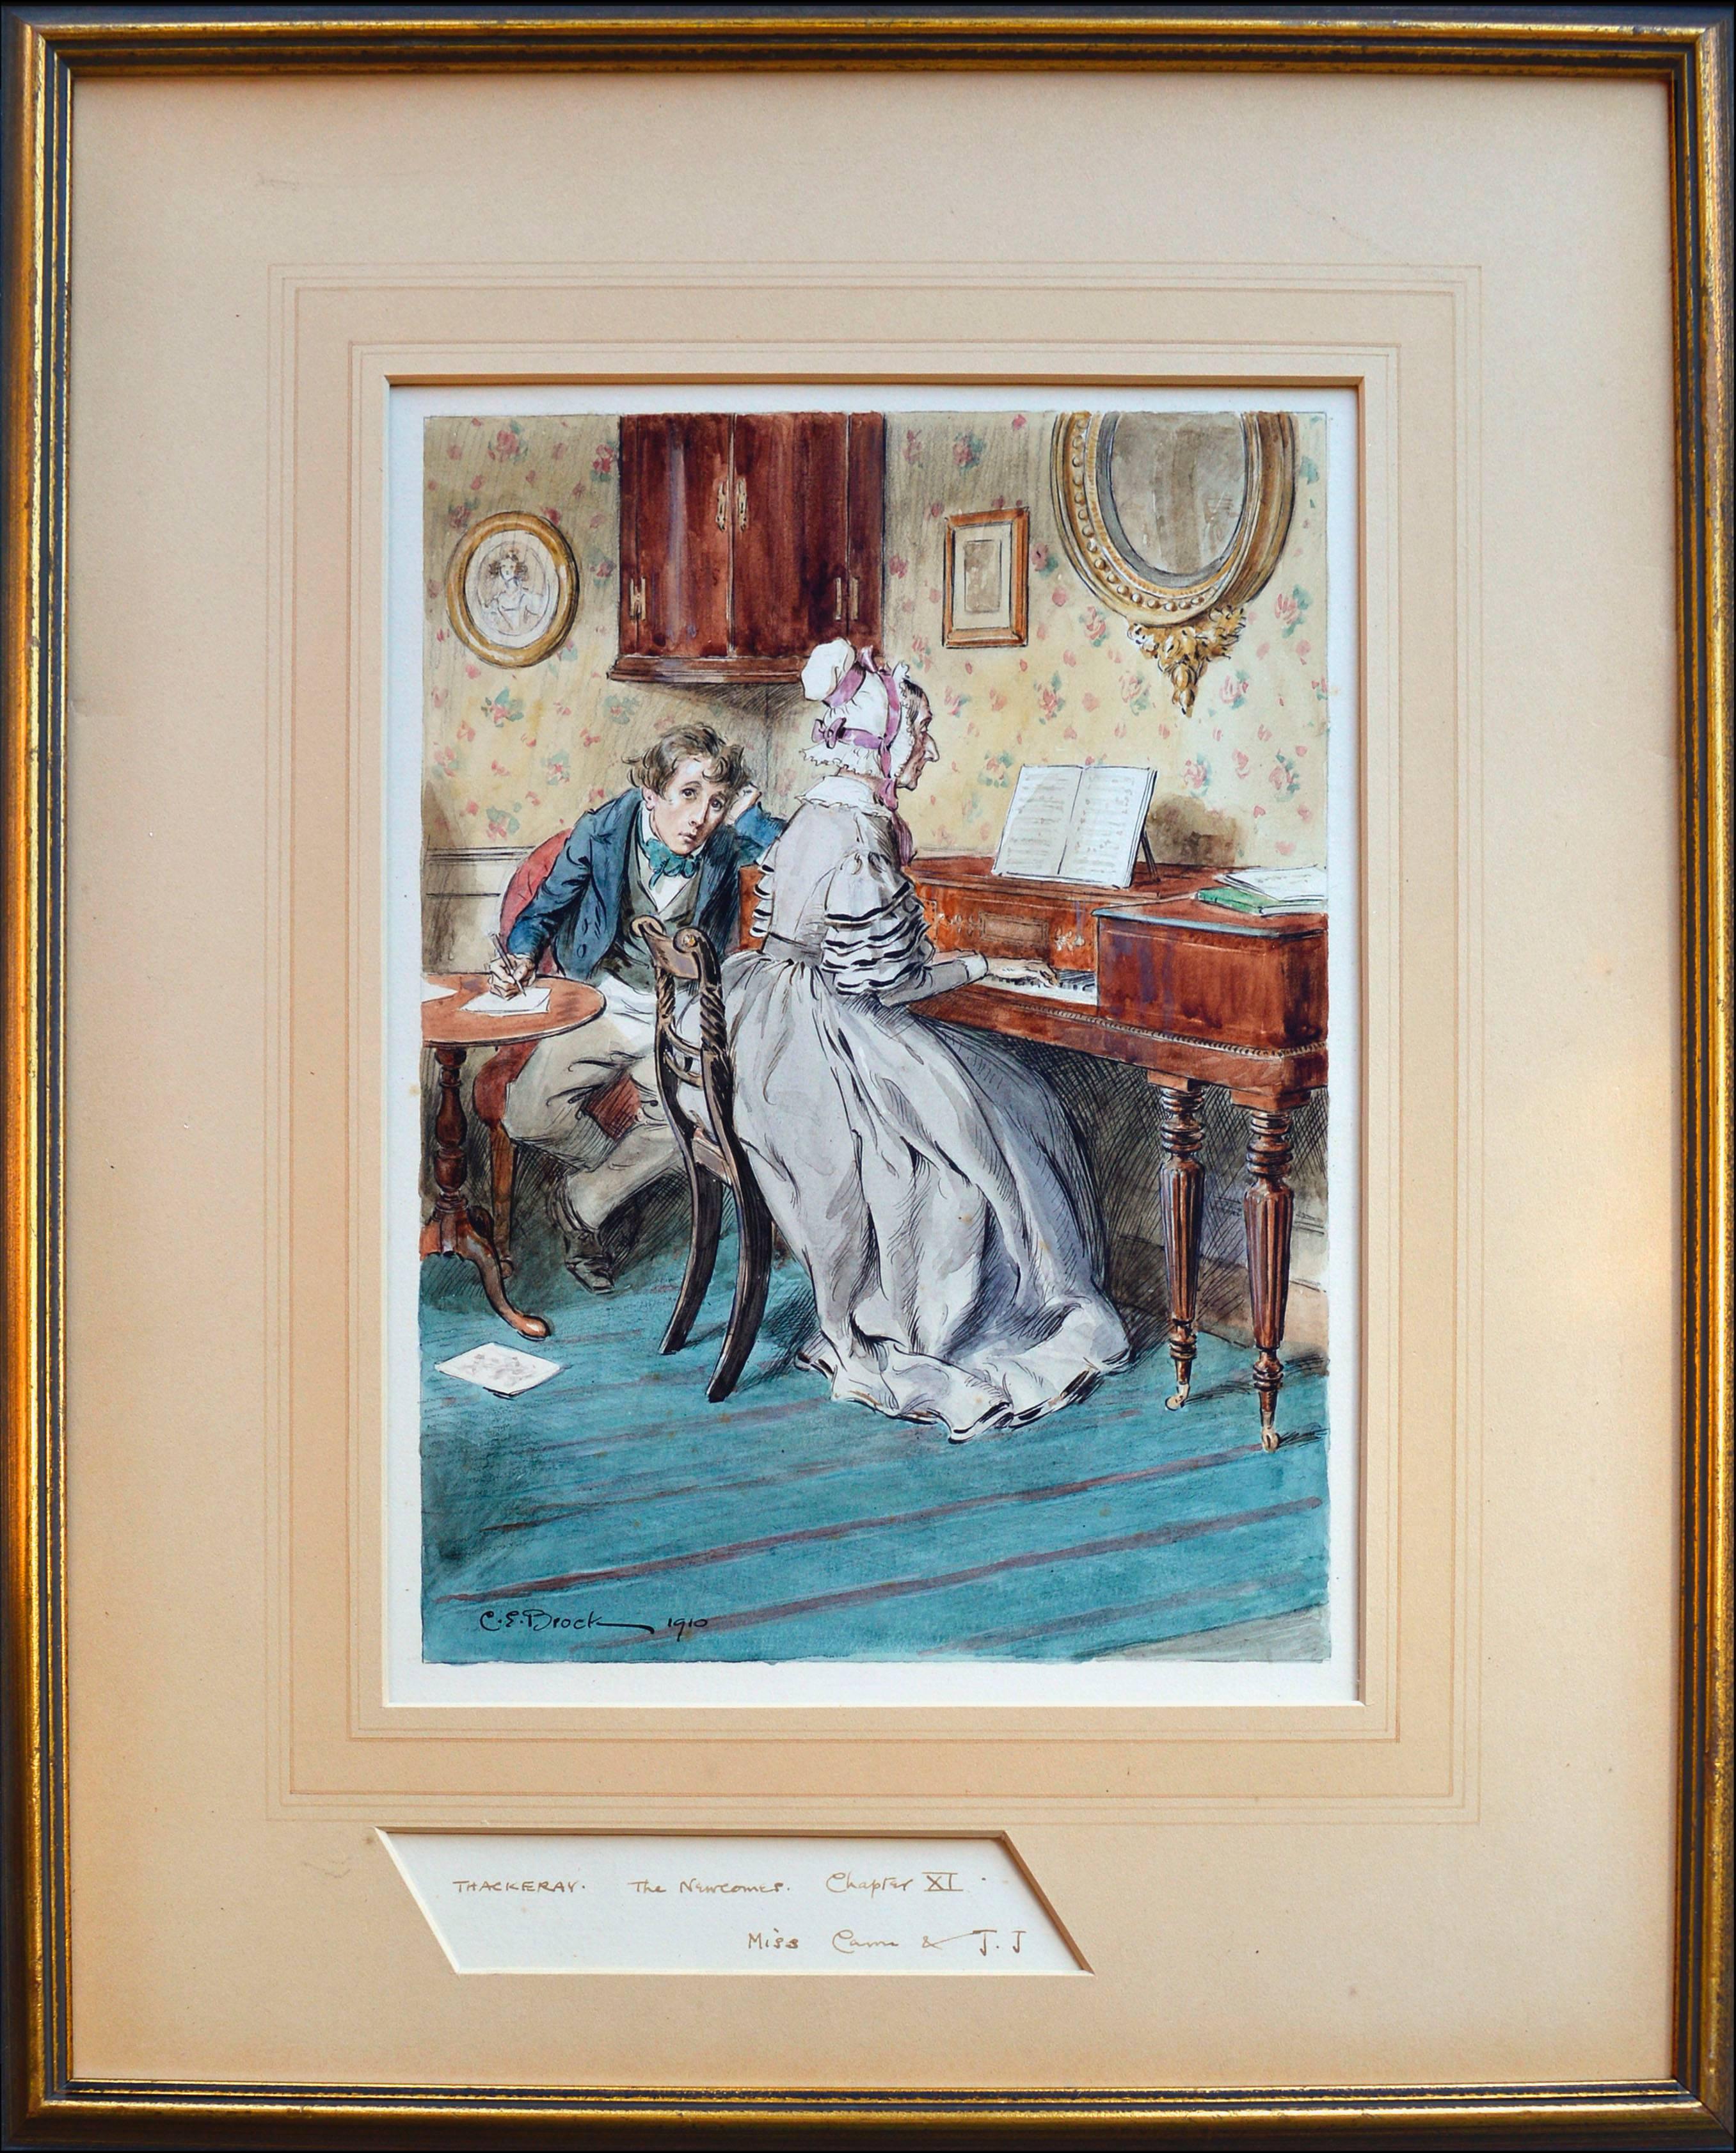 Charles Edmund Brock Figurative Art - "The Newcomes, Chapter XI" - Early 20th Century Figurative Watercolor with Piano